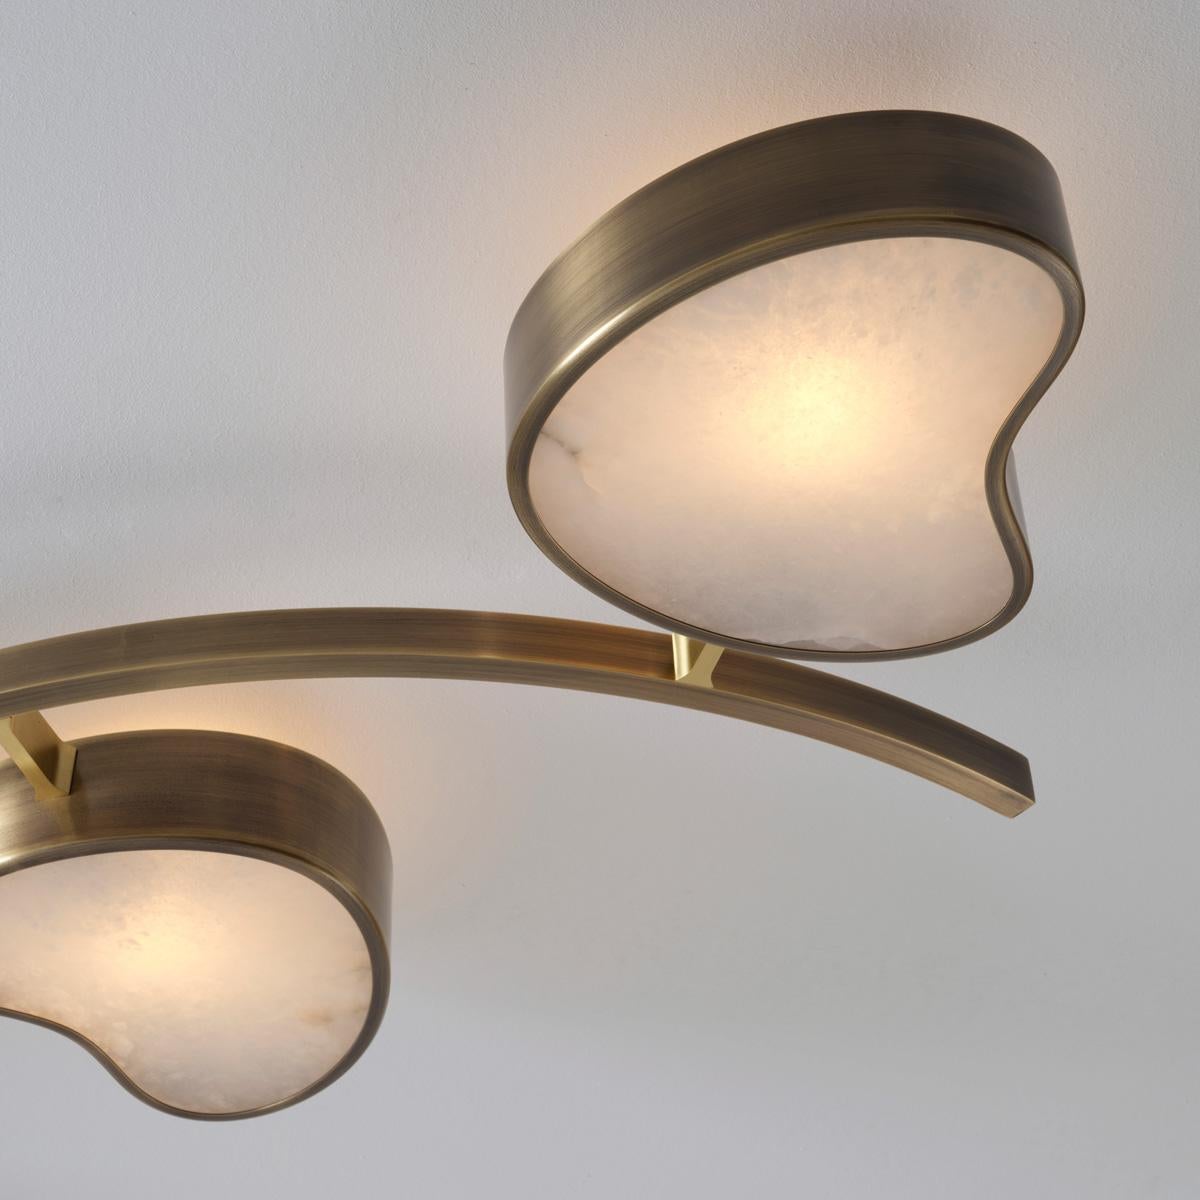 Contemporary Cuore N.6 Ceiling Light by Gaspare Asaro. Satin Brass and Sand White Finish For Sale